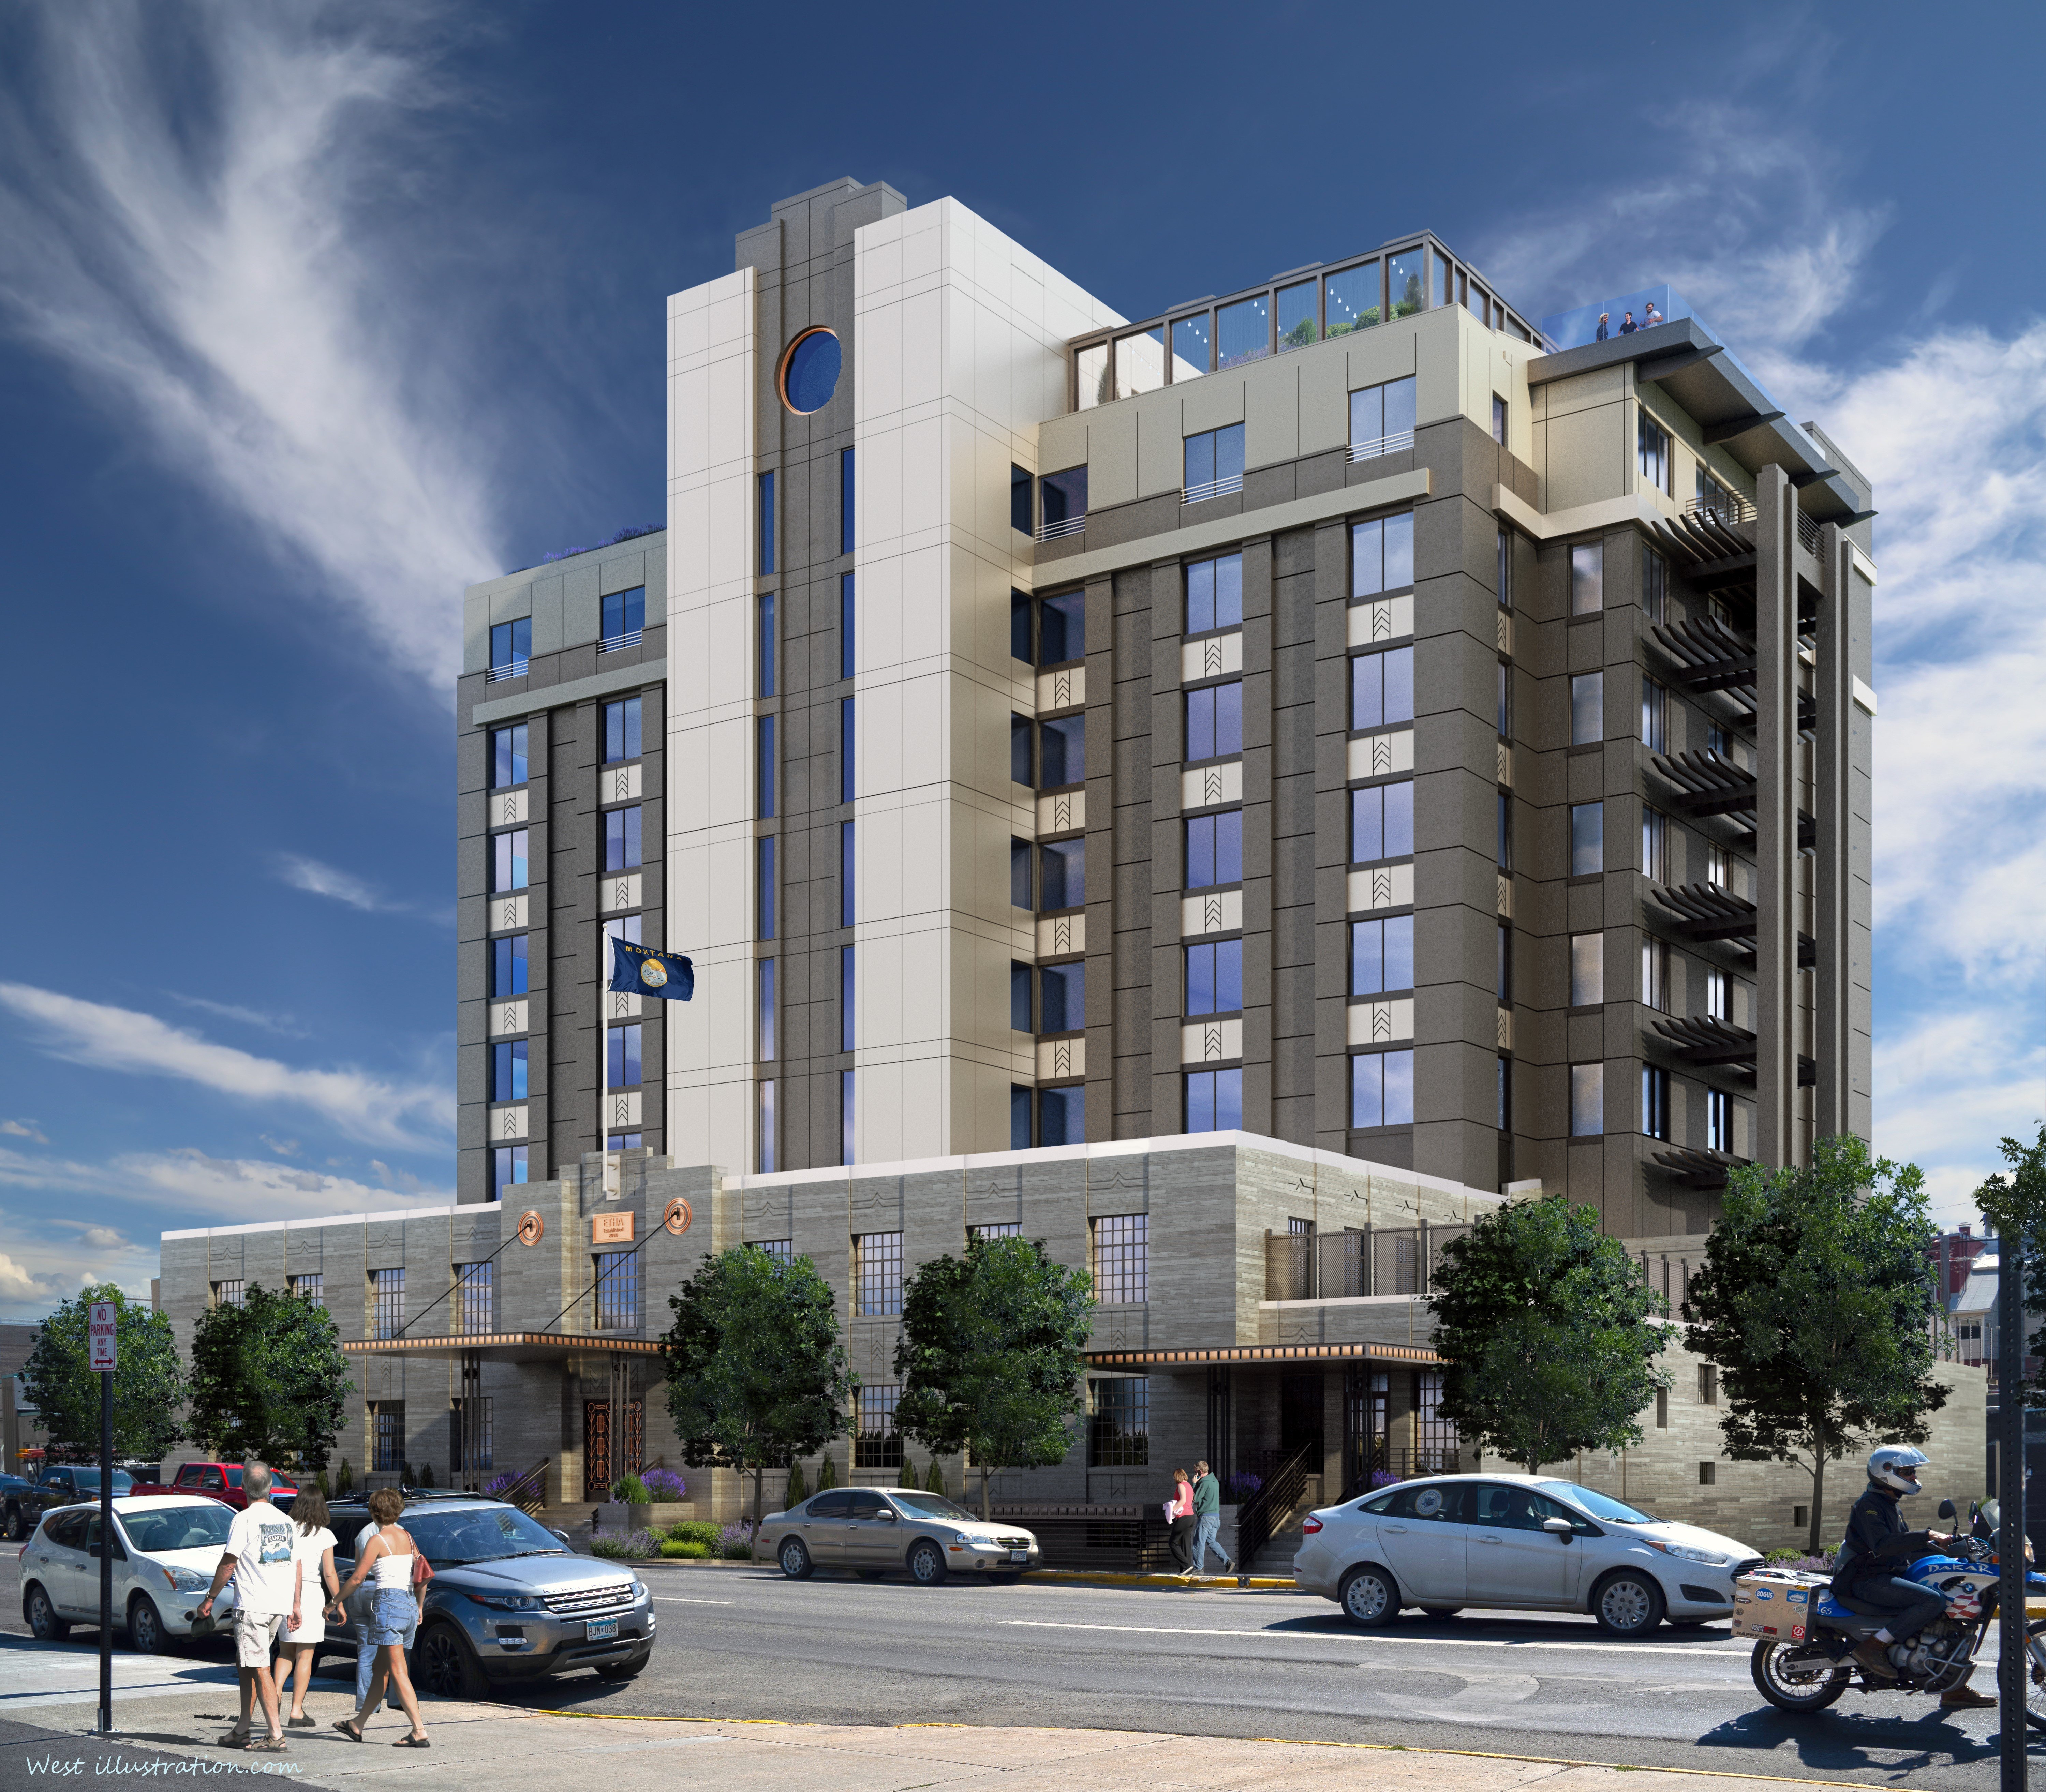 The new hotel will bean adaptive reuse project and is scheduled to open in Bozeman early 2020